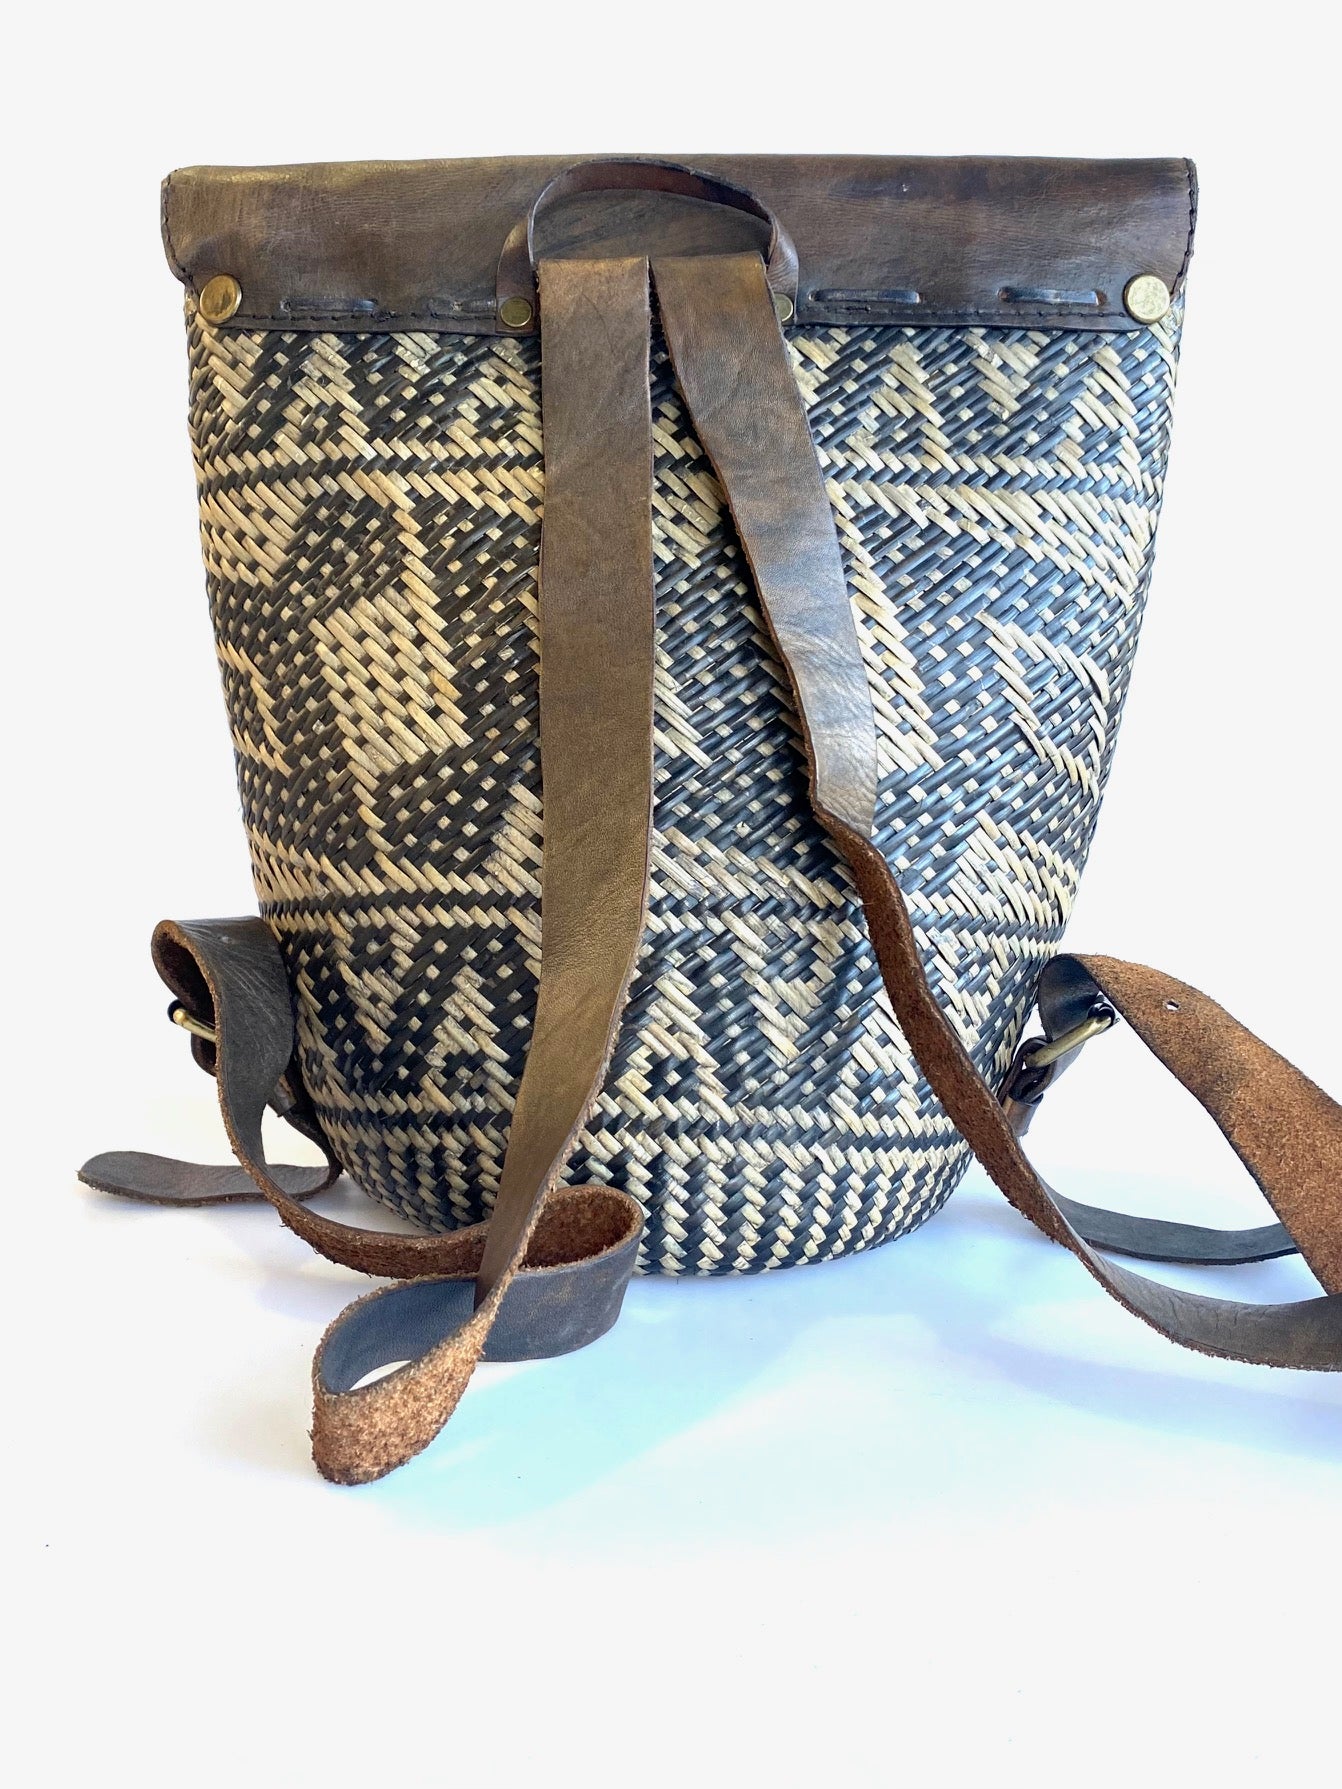 Rustic Rattan Leather Backpack